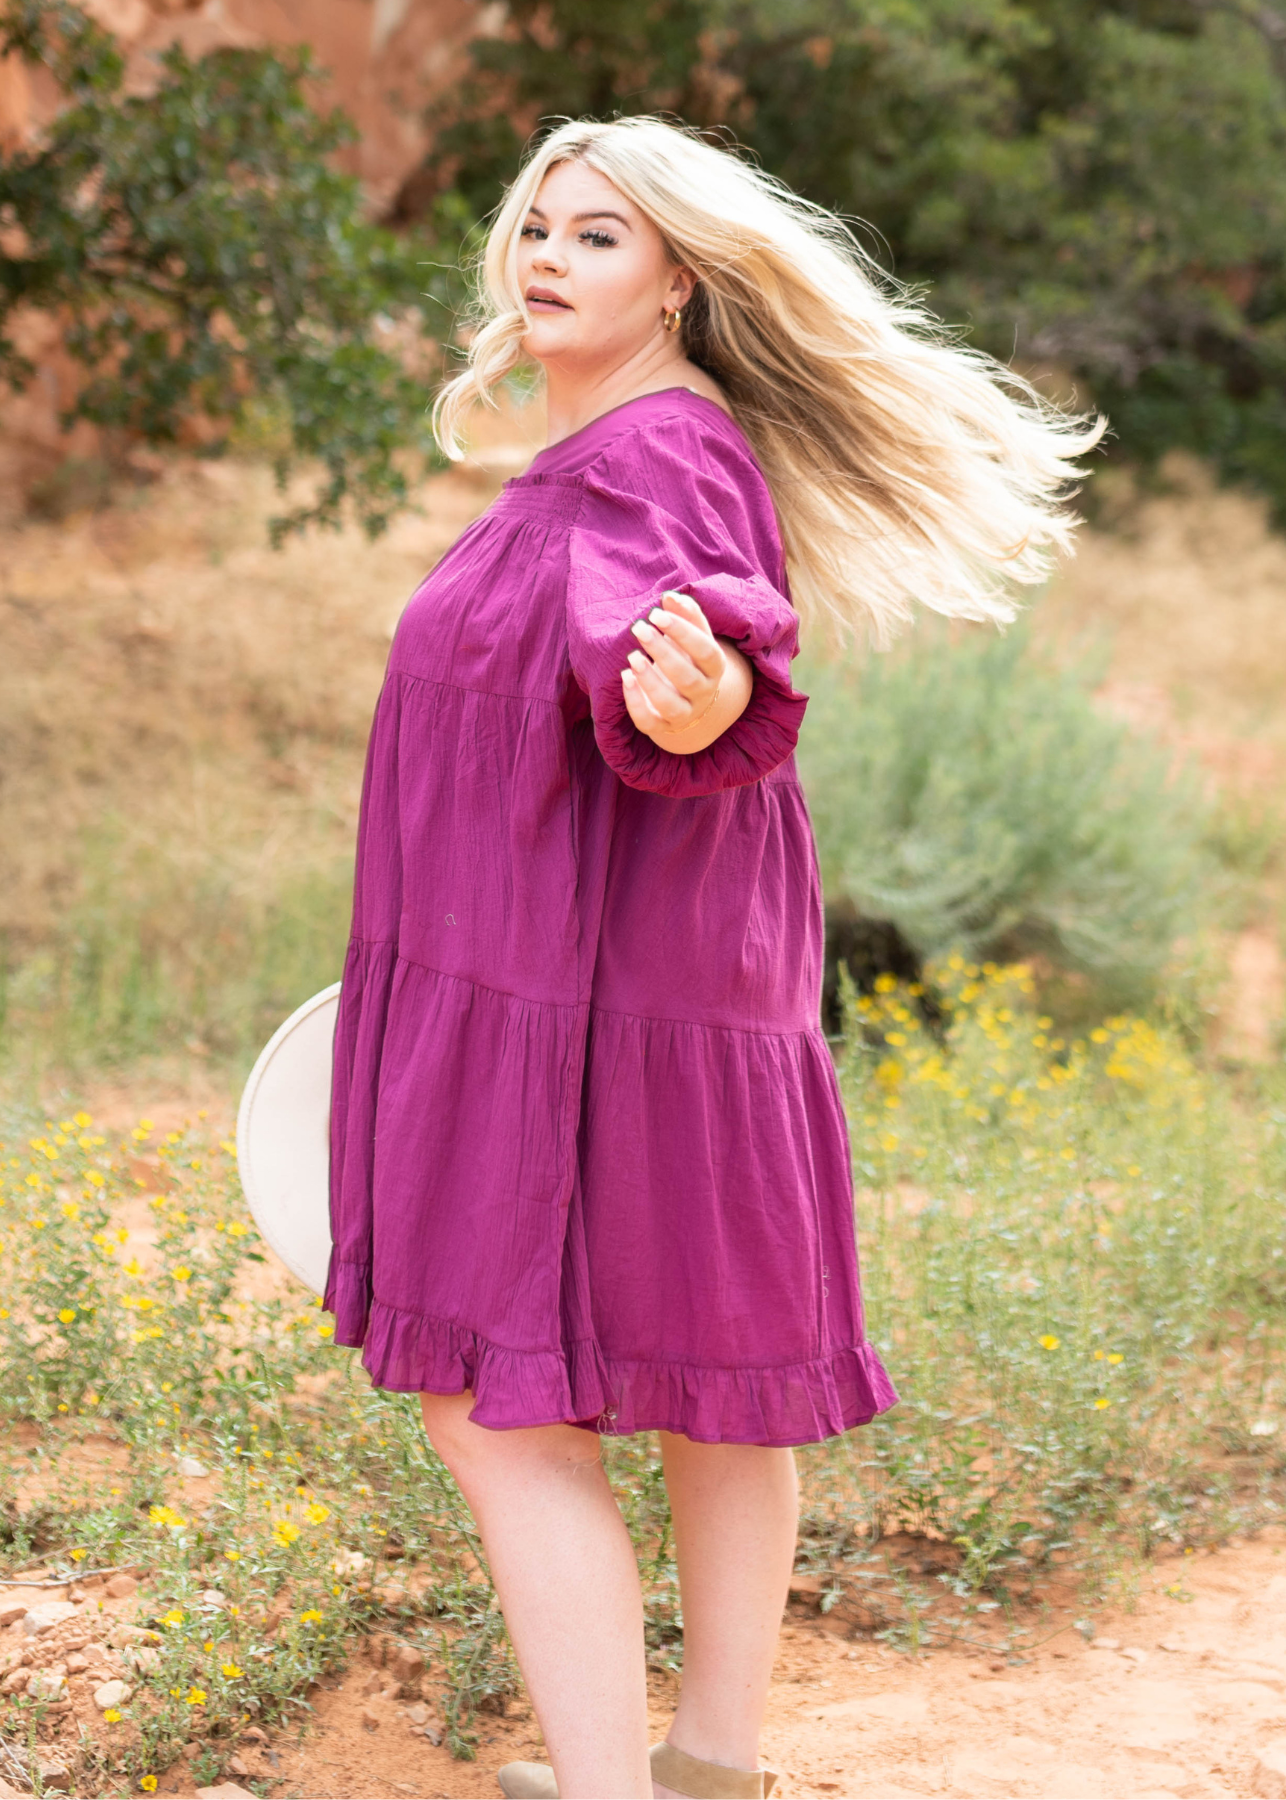 Plus size berry dress with a tiered skirt and ruffle at the bottom